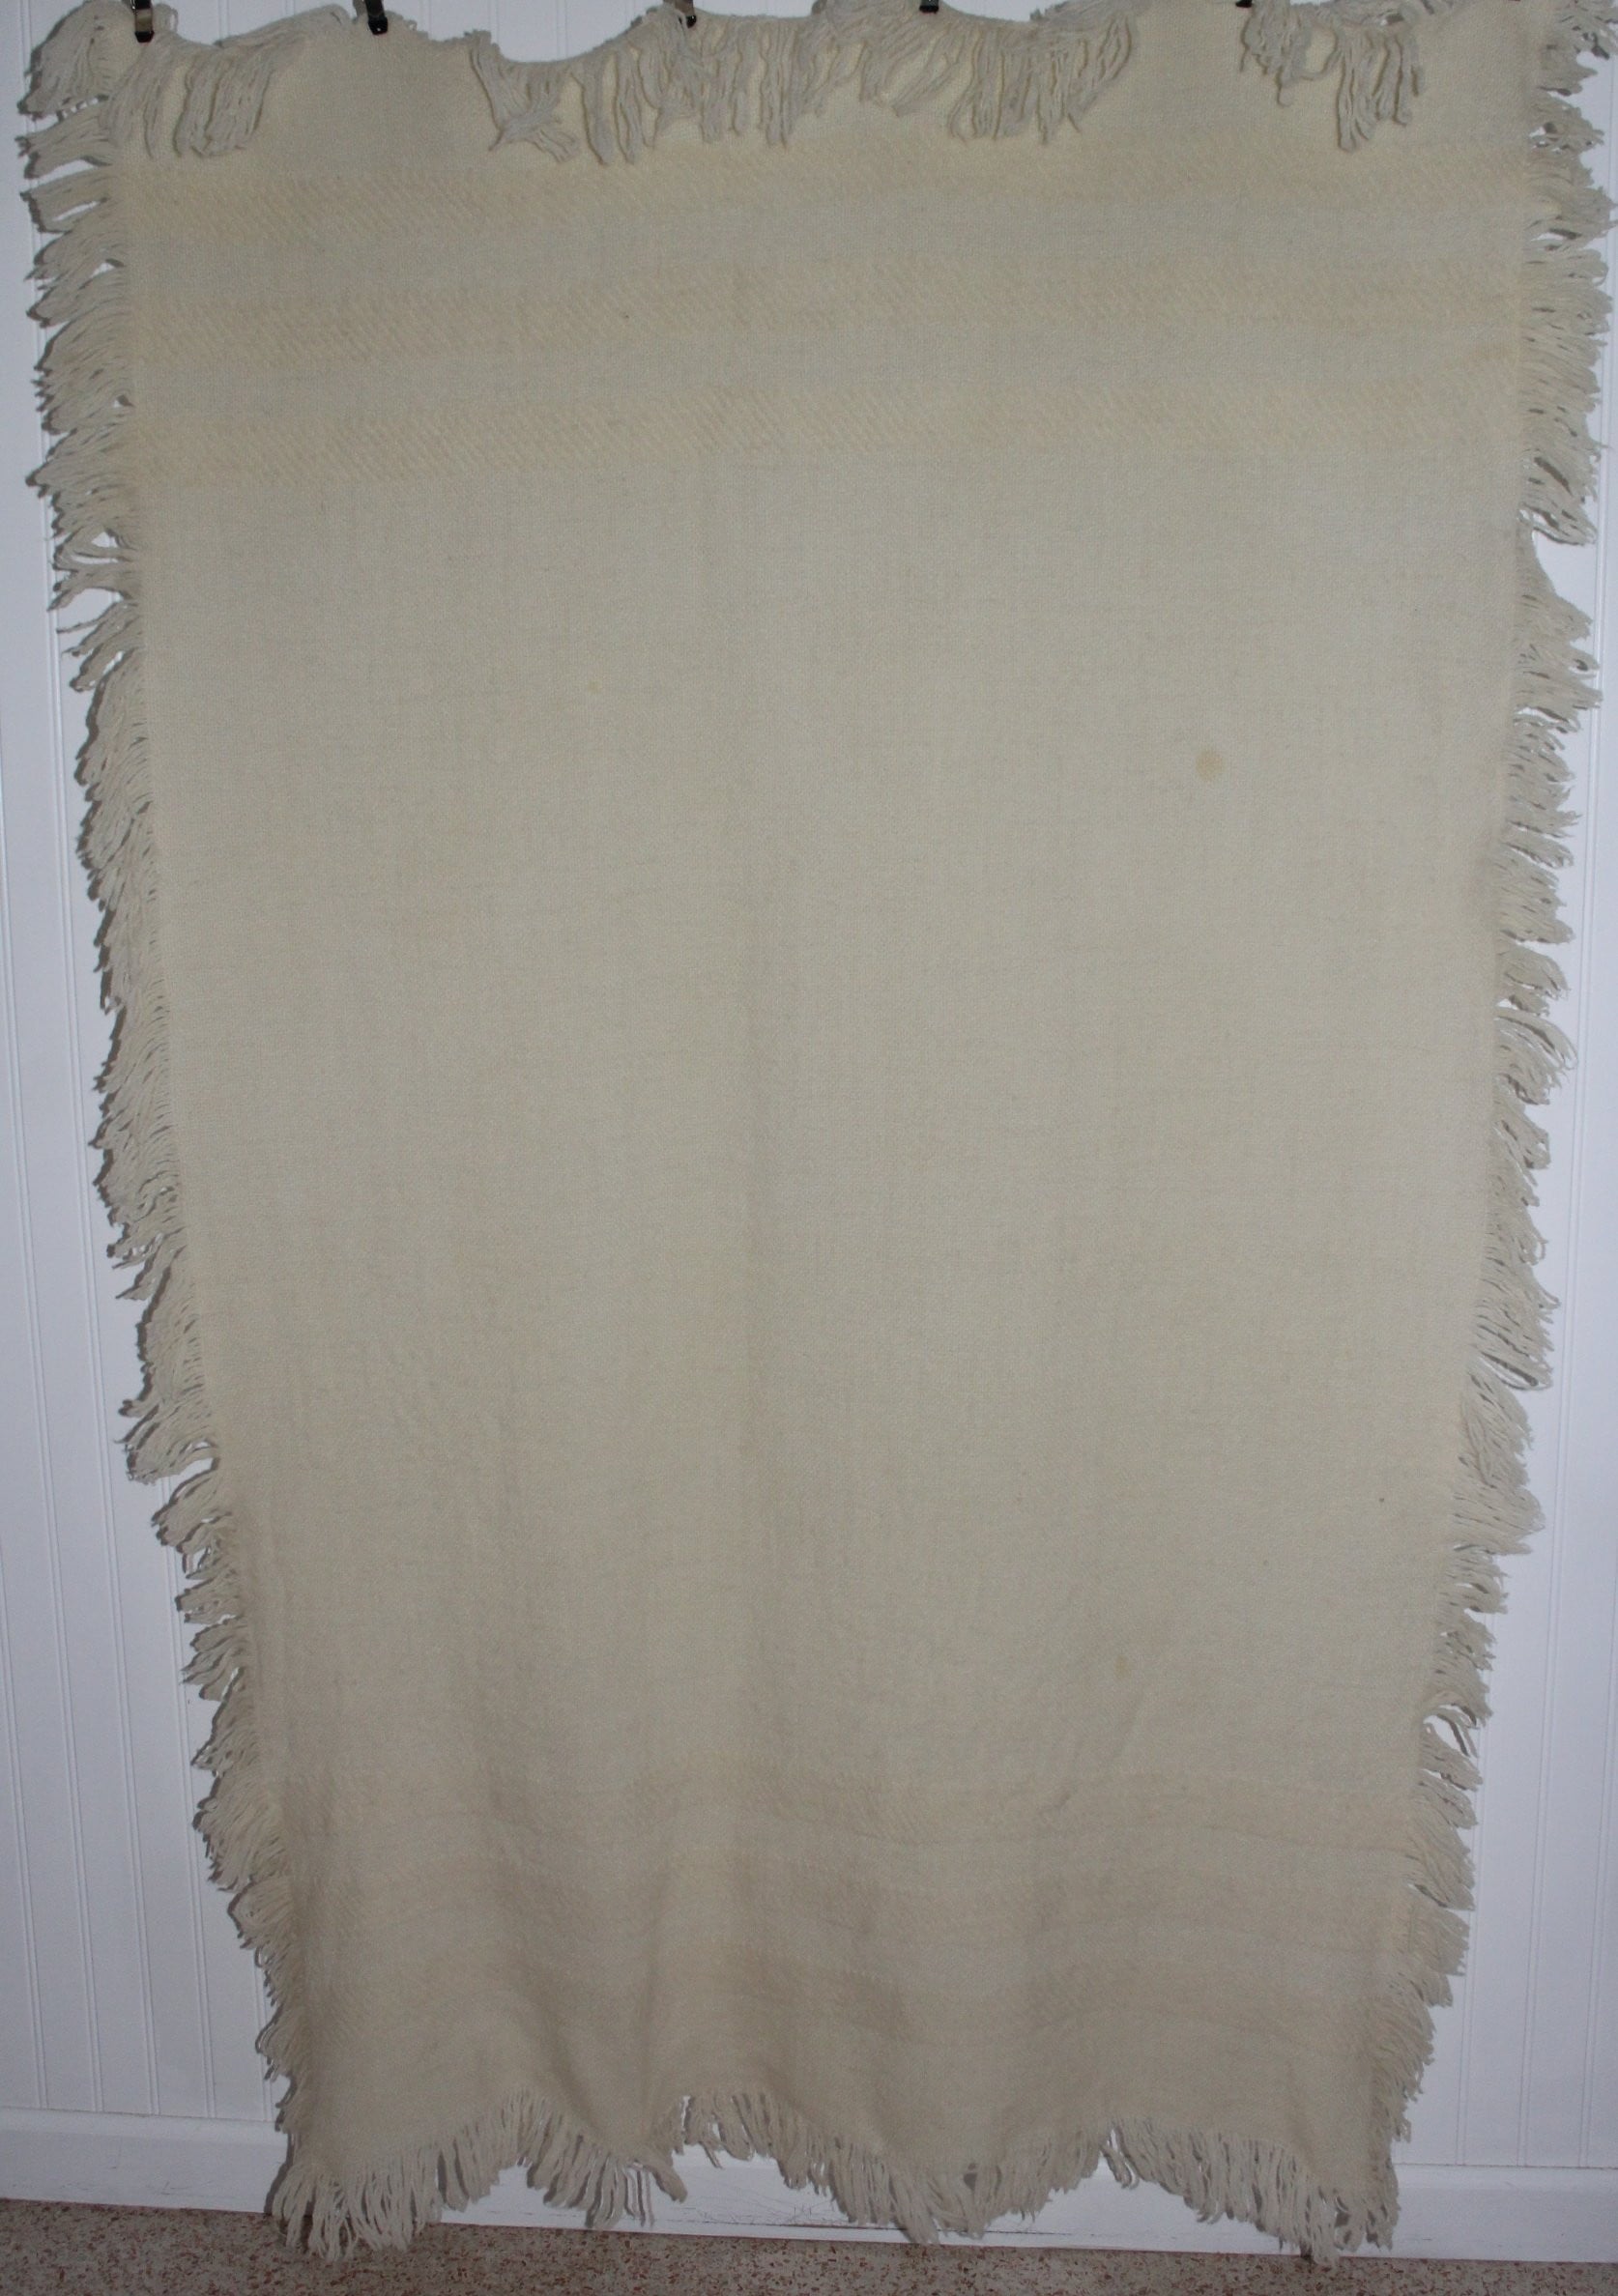 Wool Throw Hand Woven Ivory Fringe 4 Sides Churchill No Tag soft